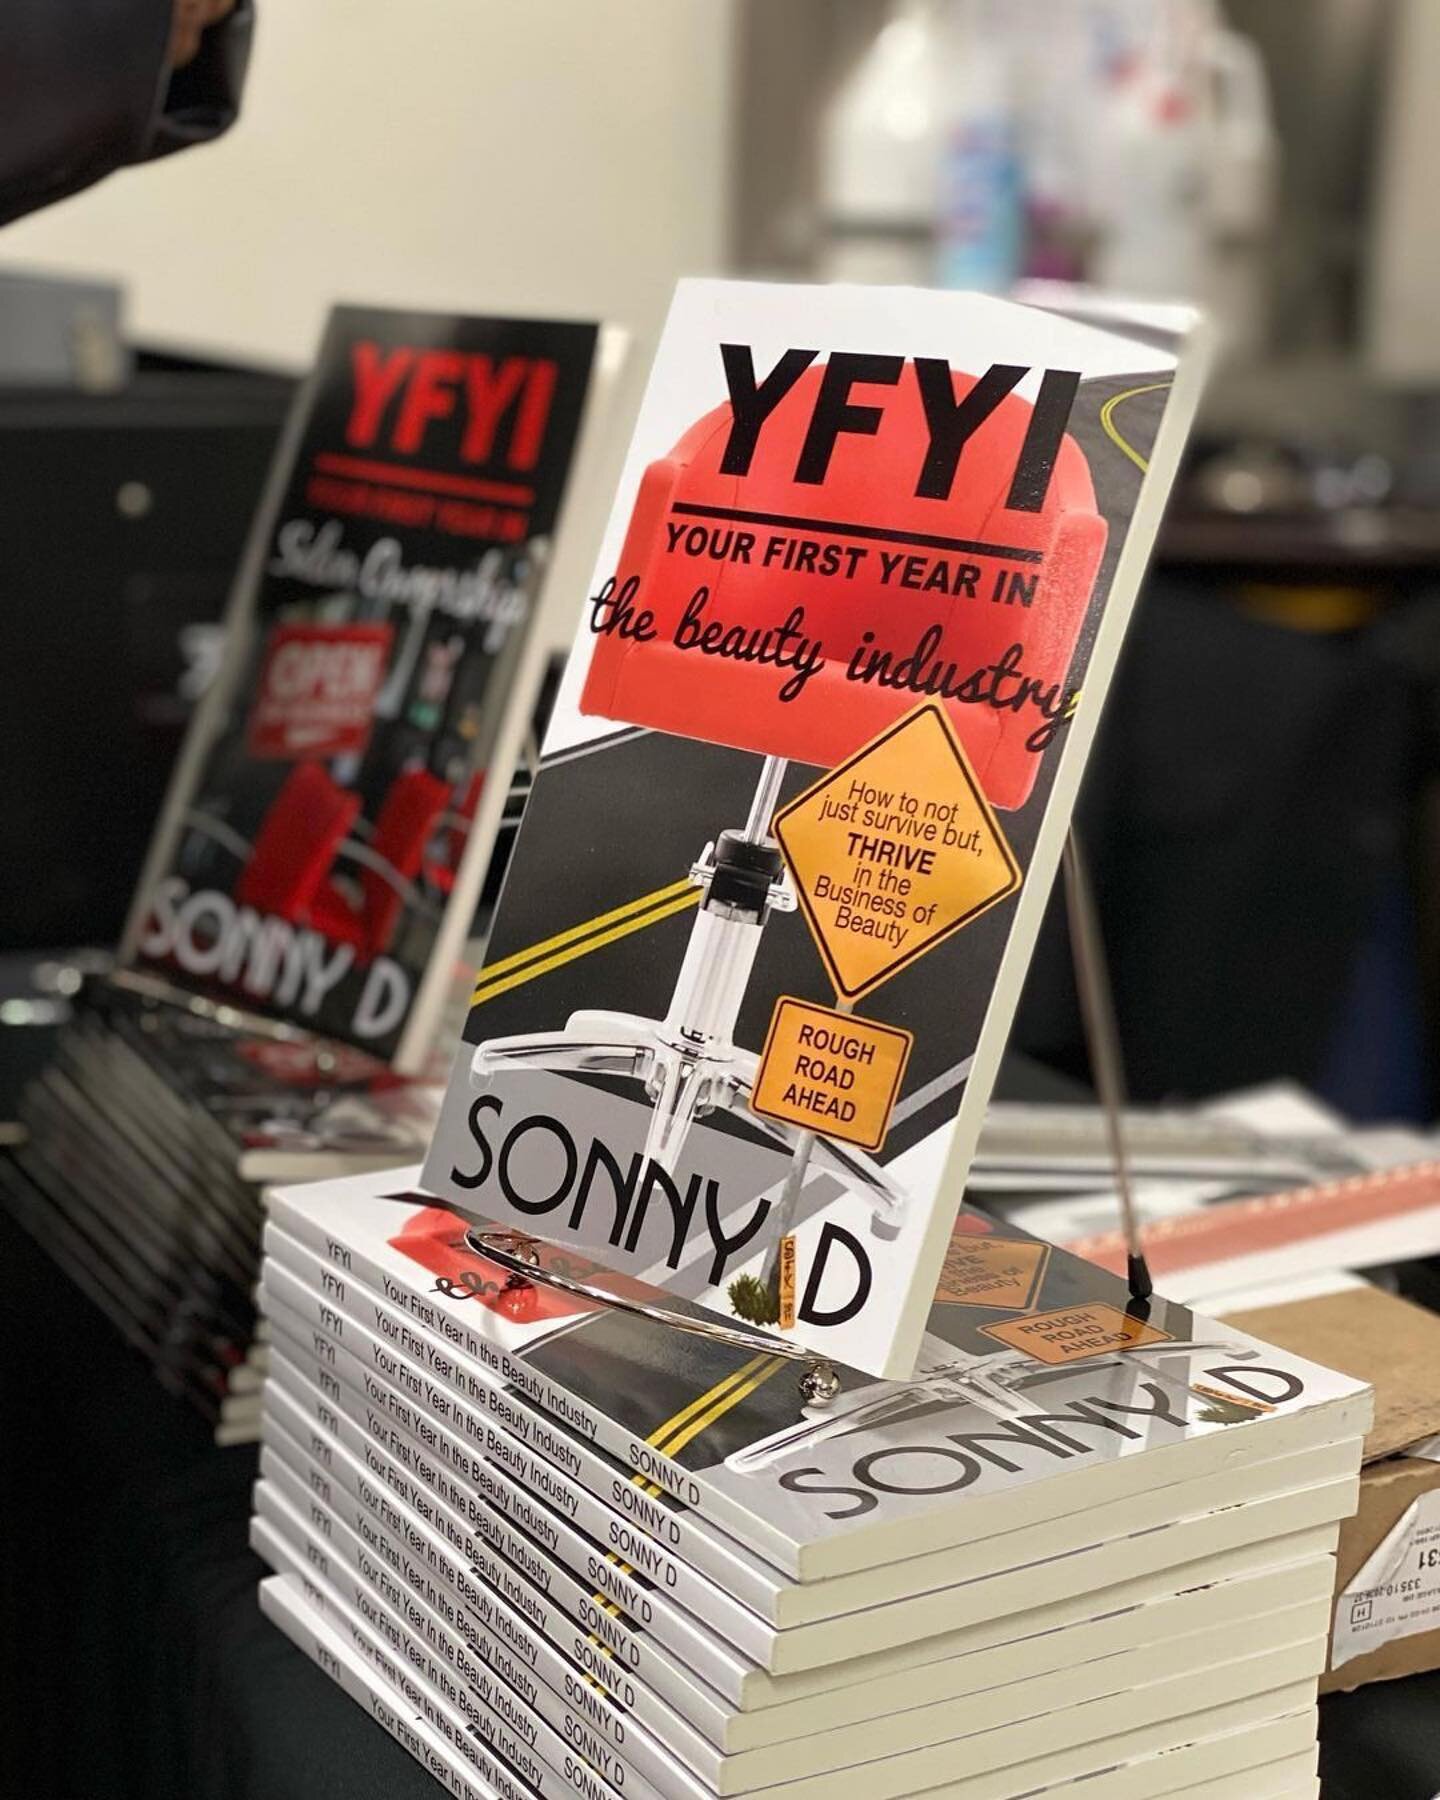 If there were to be a vol. 3 of the #YFYI book series, what would it be?🤔
vol. 1 Your First Year In the beauty industry 
vol. 2 Your First Year In salon ownership 
vol. 3 ____________________________
&bull;
&bull;
&bull;
#books #author #yourfirstyea